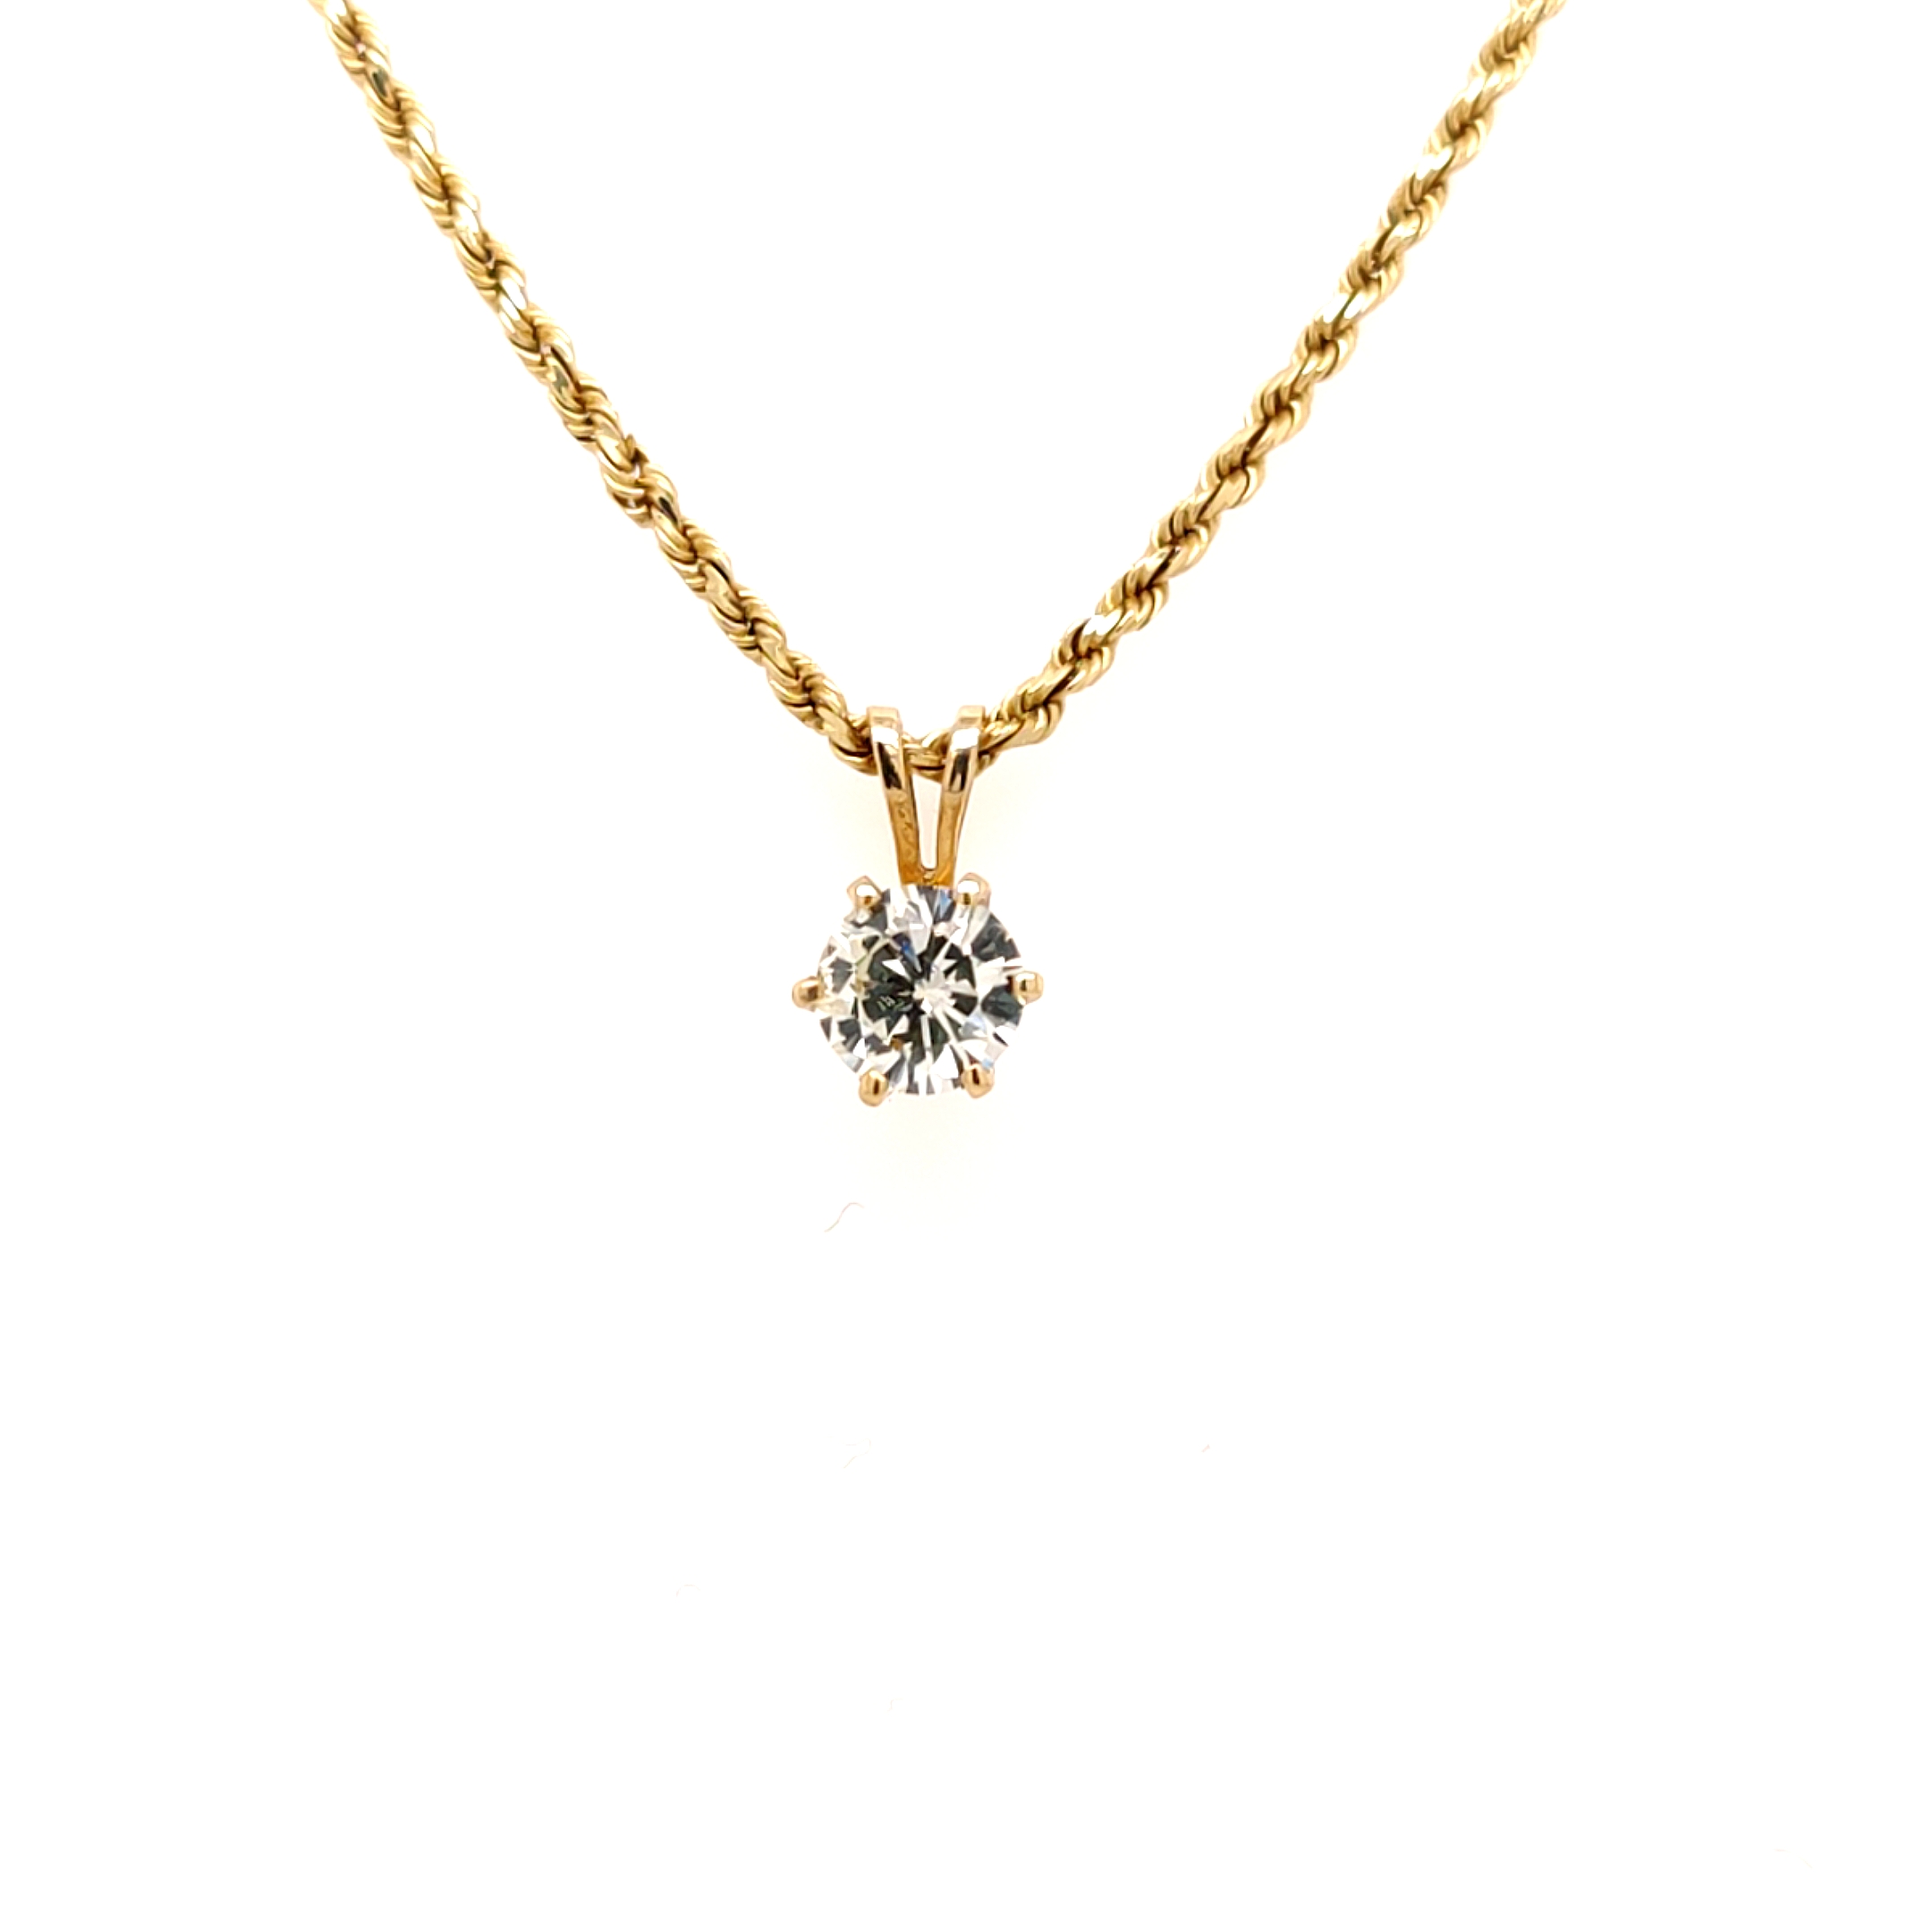 14ct Yellow Gold, Diamond Solitaire Pendant (0.75ct Assessed) with 18 Inch 14ct Yellow Gold Chain – Pre-Owned